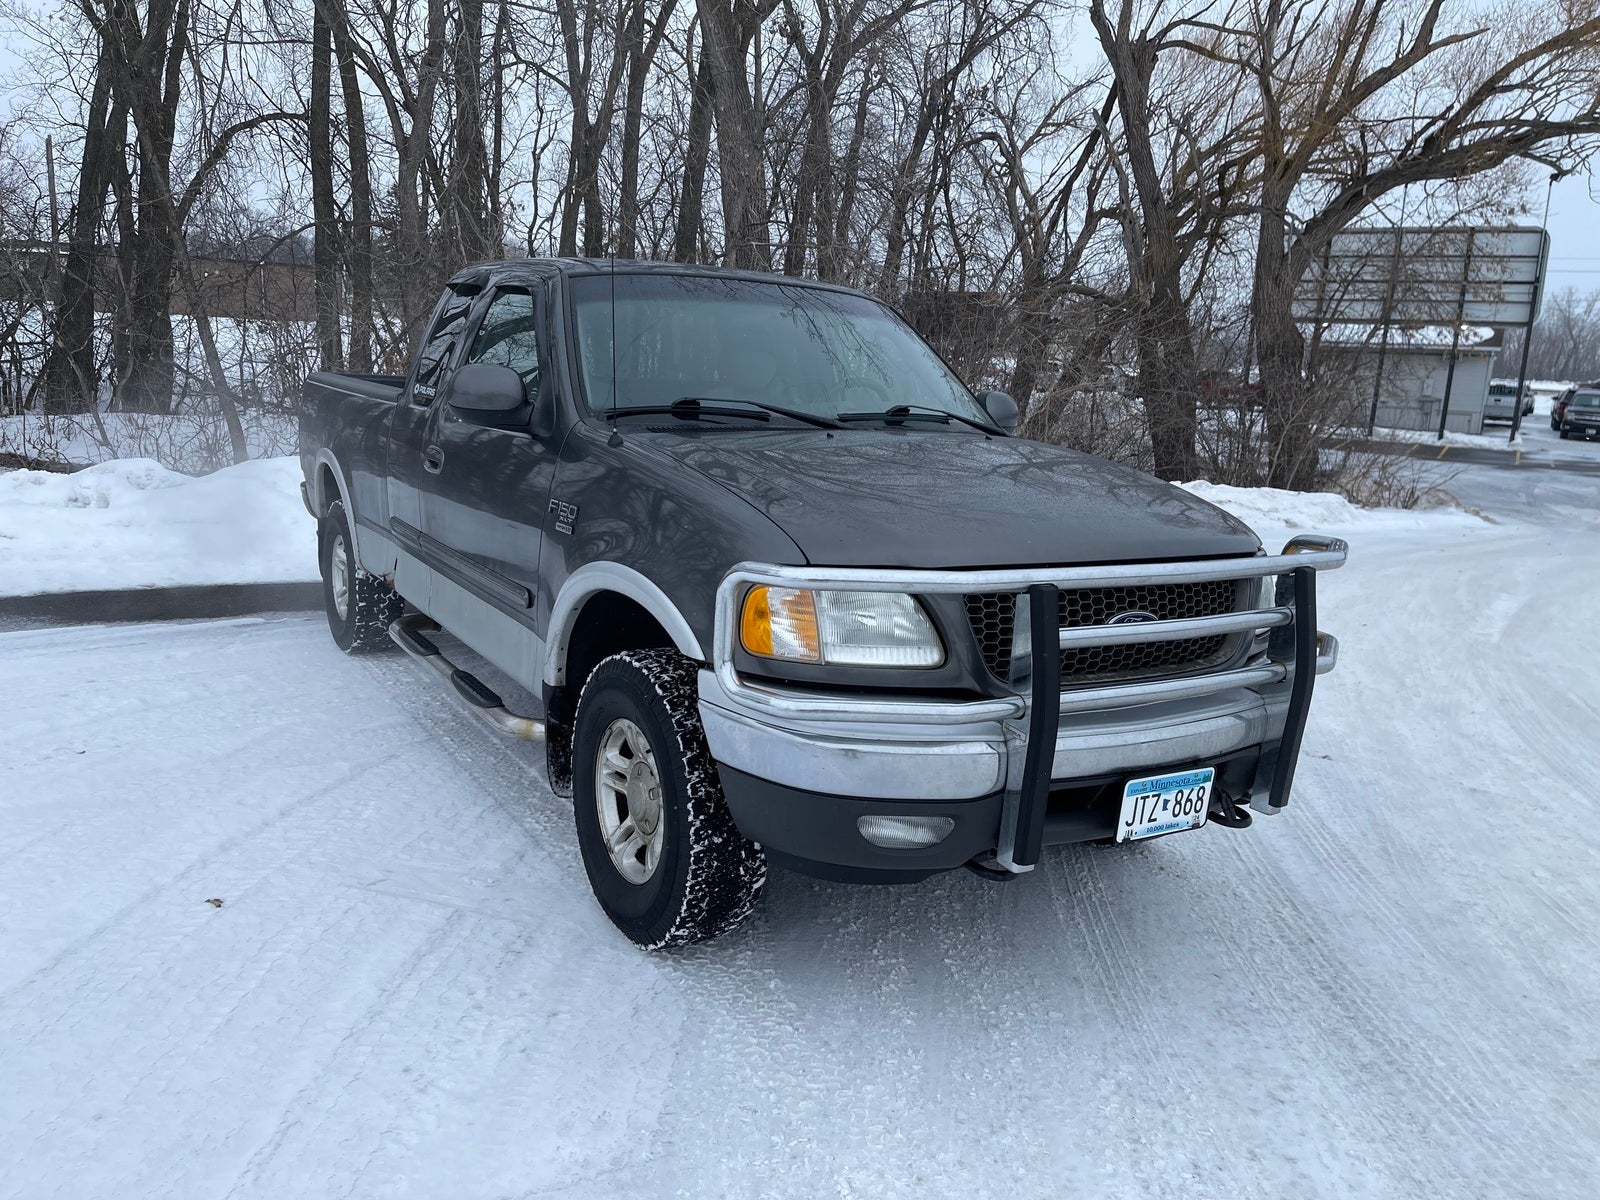 Used 2003 Ford F-150 XLT with VIN 1FTRX18LX3NA31206 for sale in Fergus Falls, Minnesota